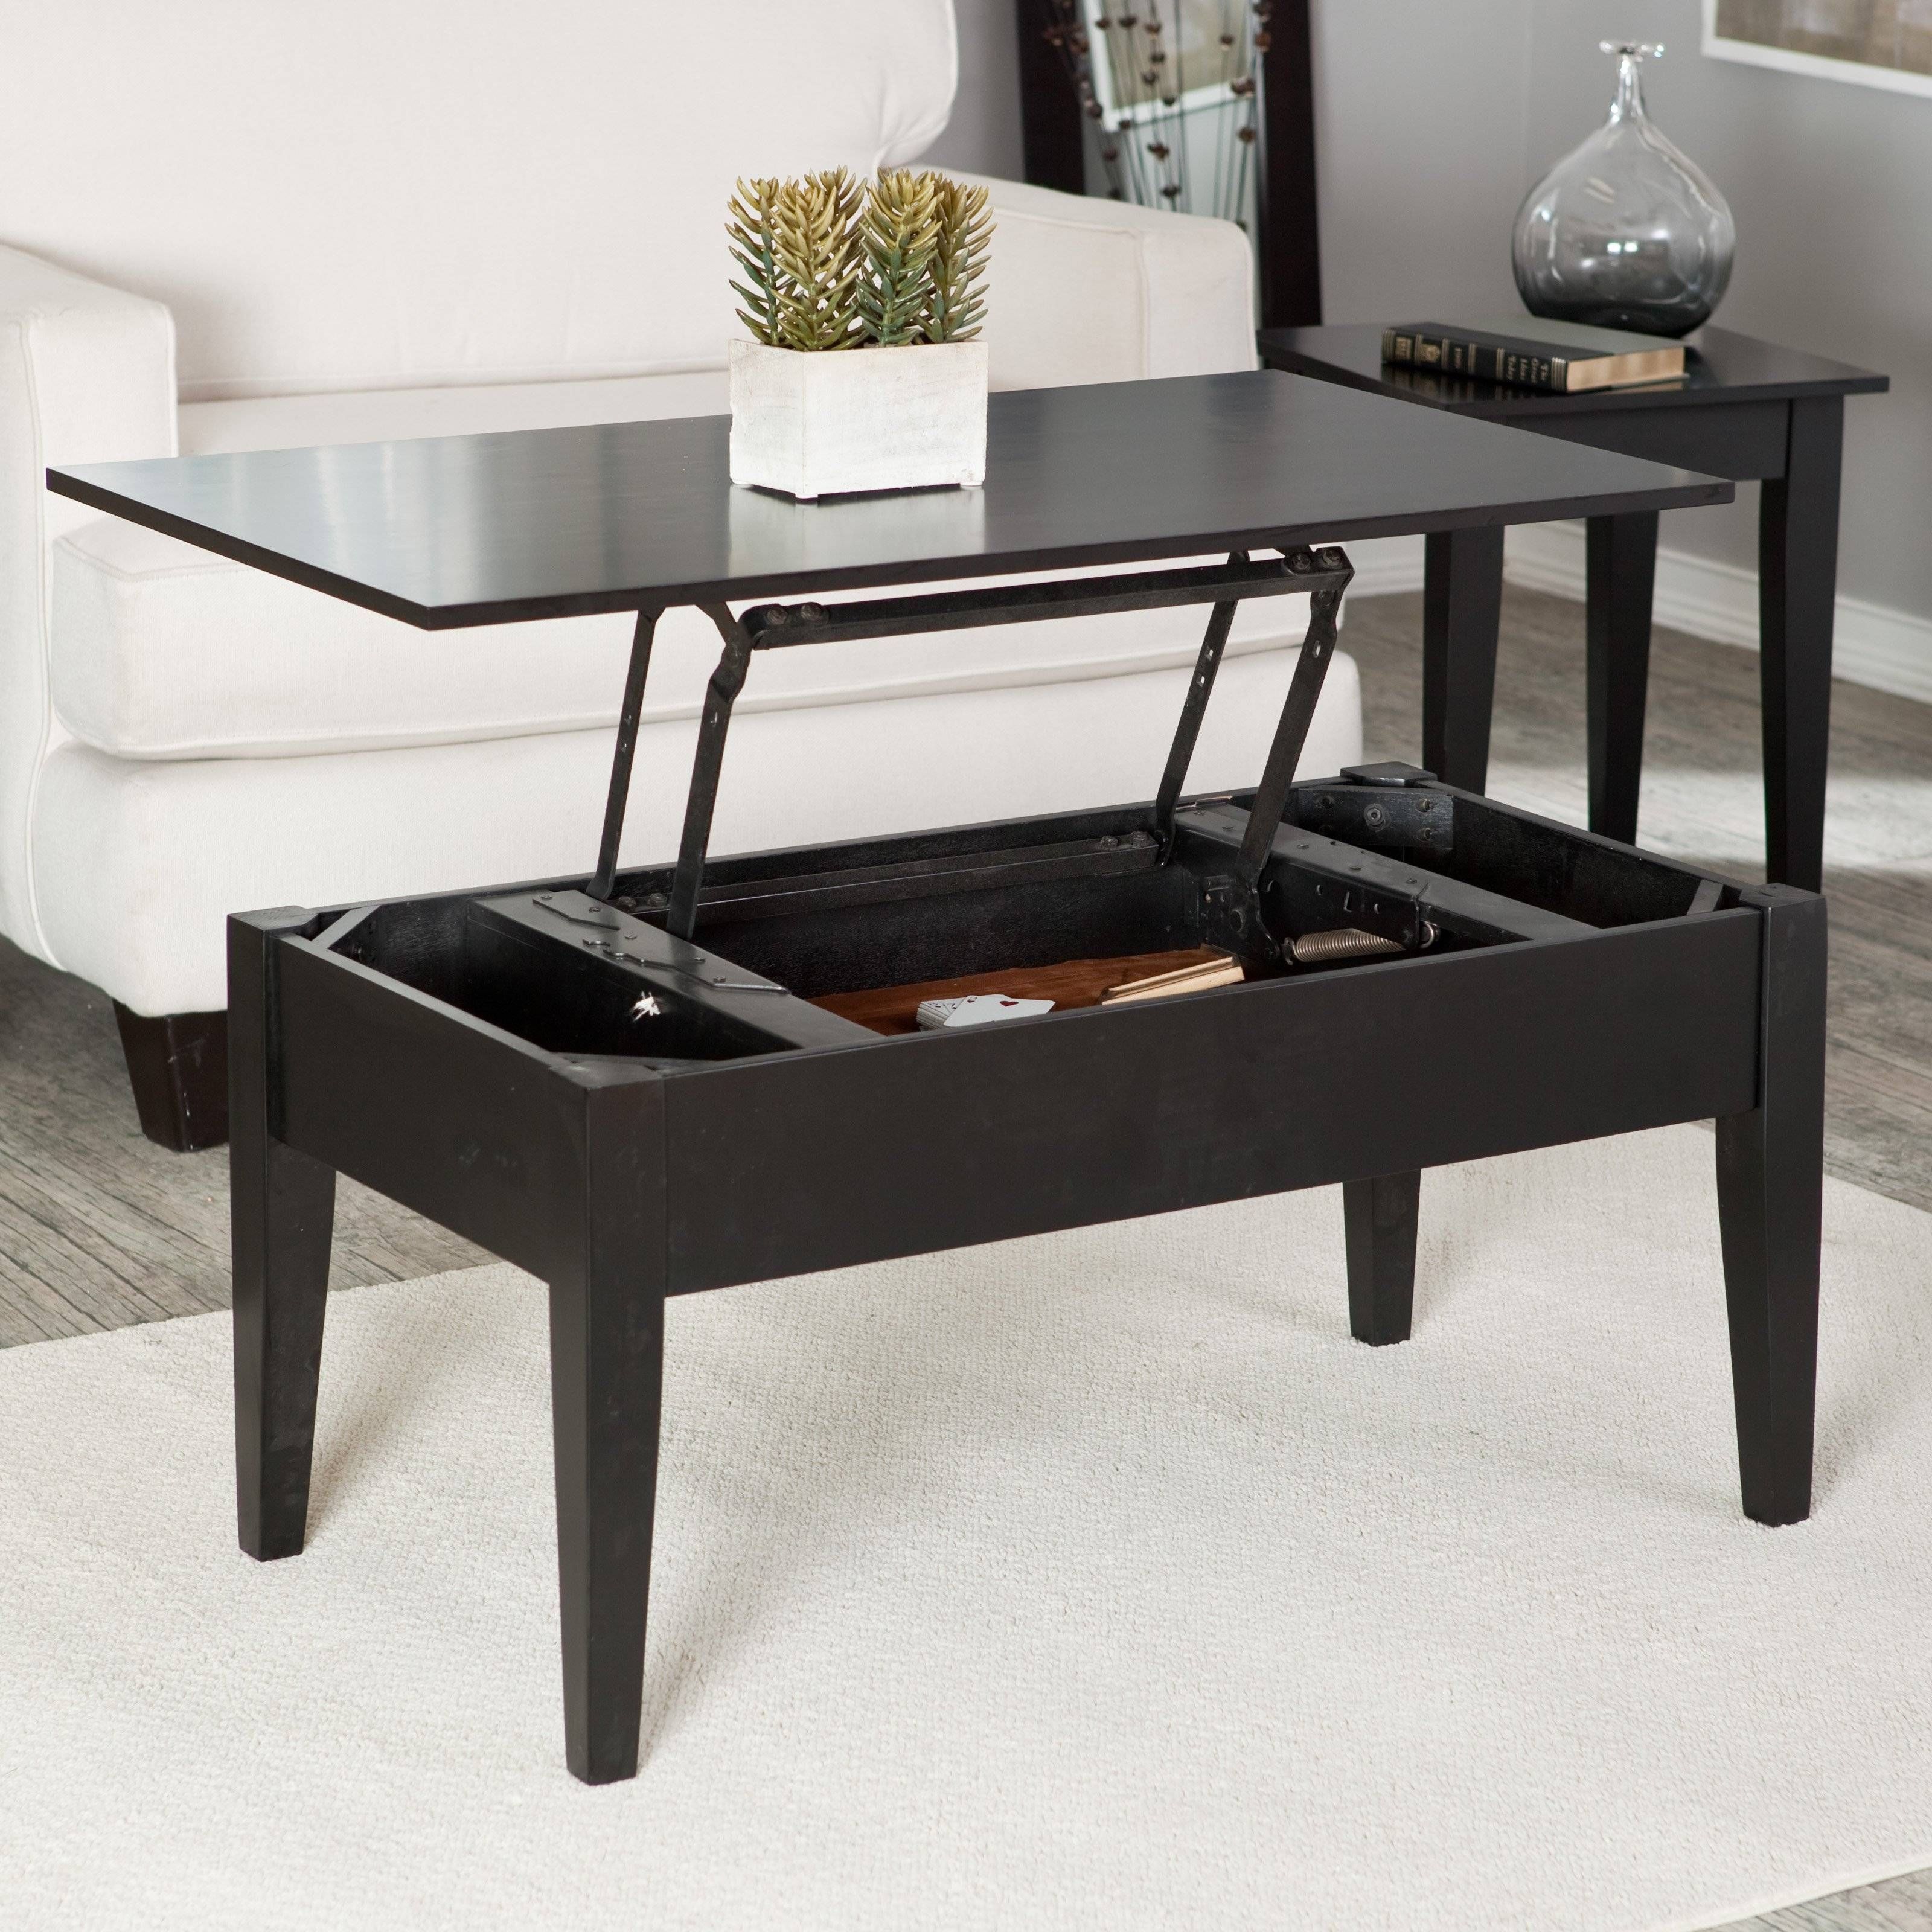 Turner Lift Top Coffee Table – Espresso | Hayneedle With Coffee Tables Extendable Top (View 11 of 30)